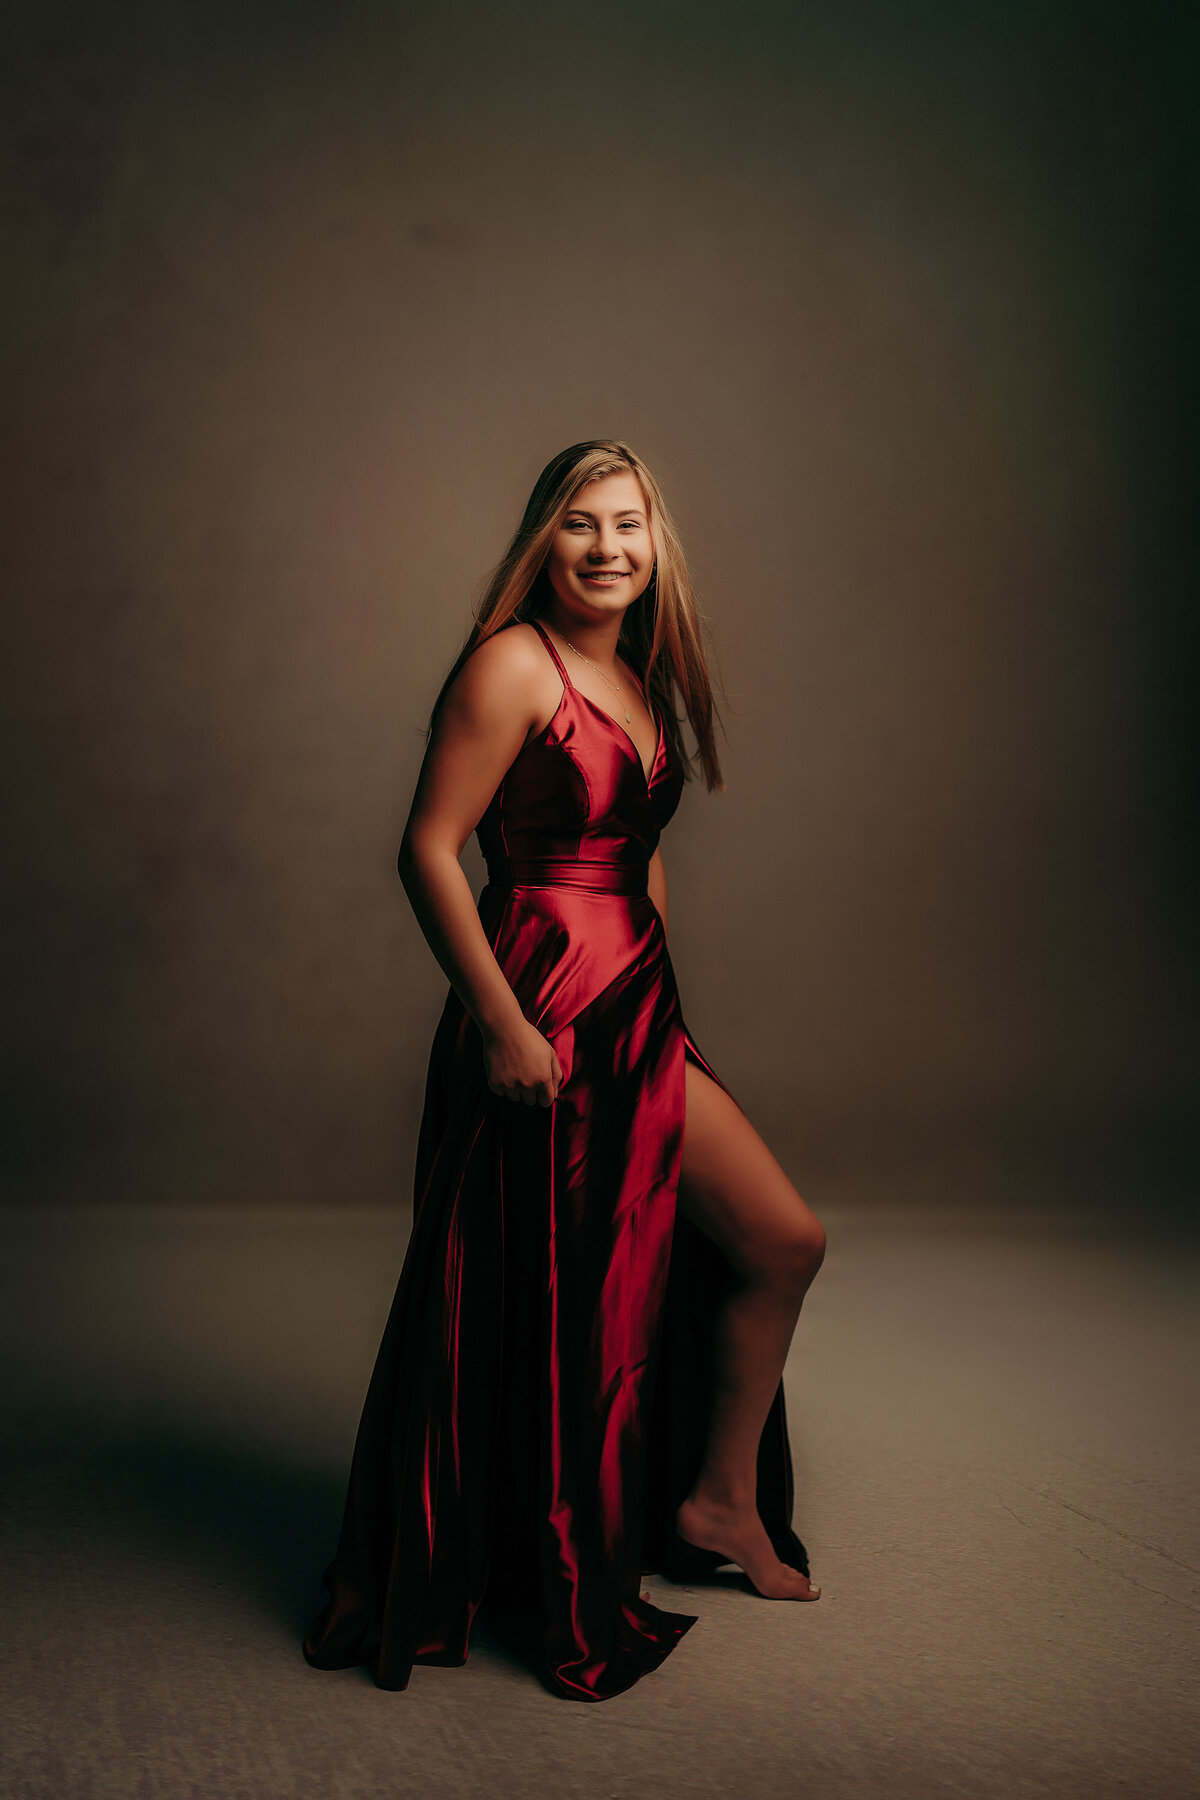 A Catholic Memorial High School senior stands in our Waukesha photo studio wearing a long, red, satin gown while posing for her senior portrait.